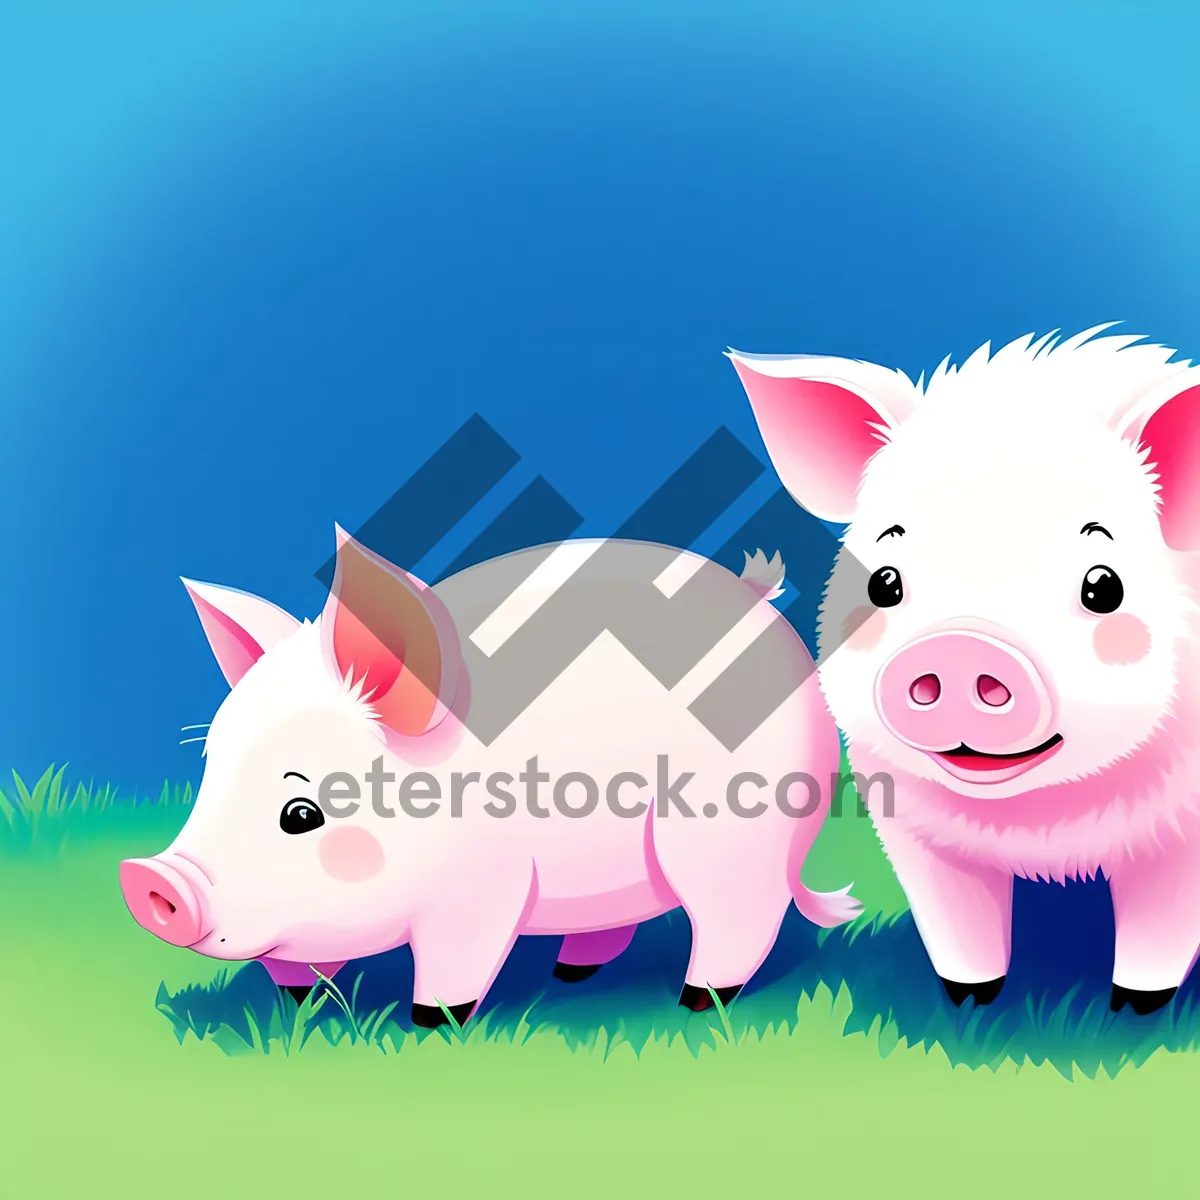 Picture of Pink Piglet Savings Bank: Investing in Financial Wealth.